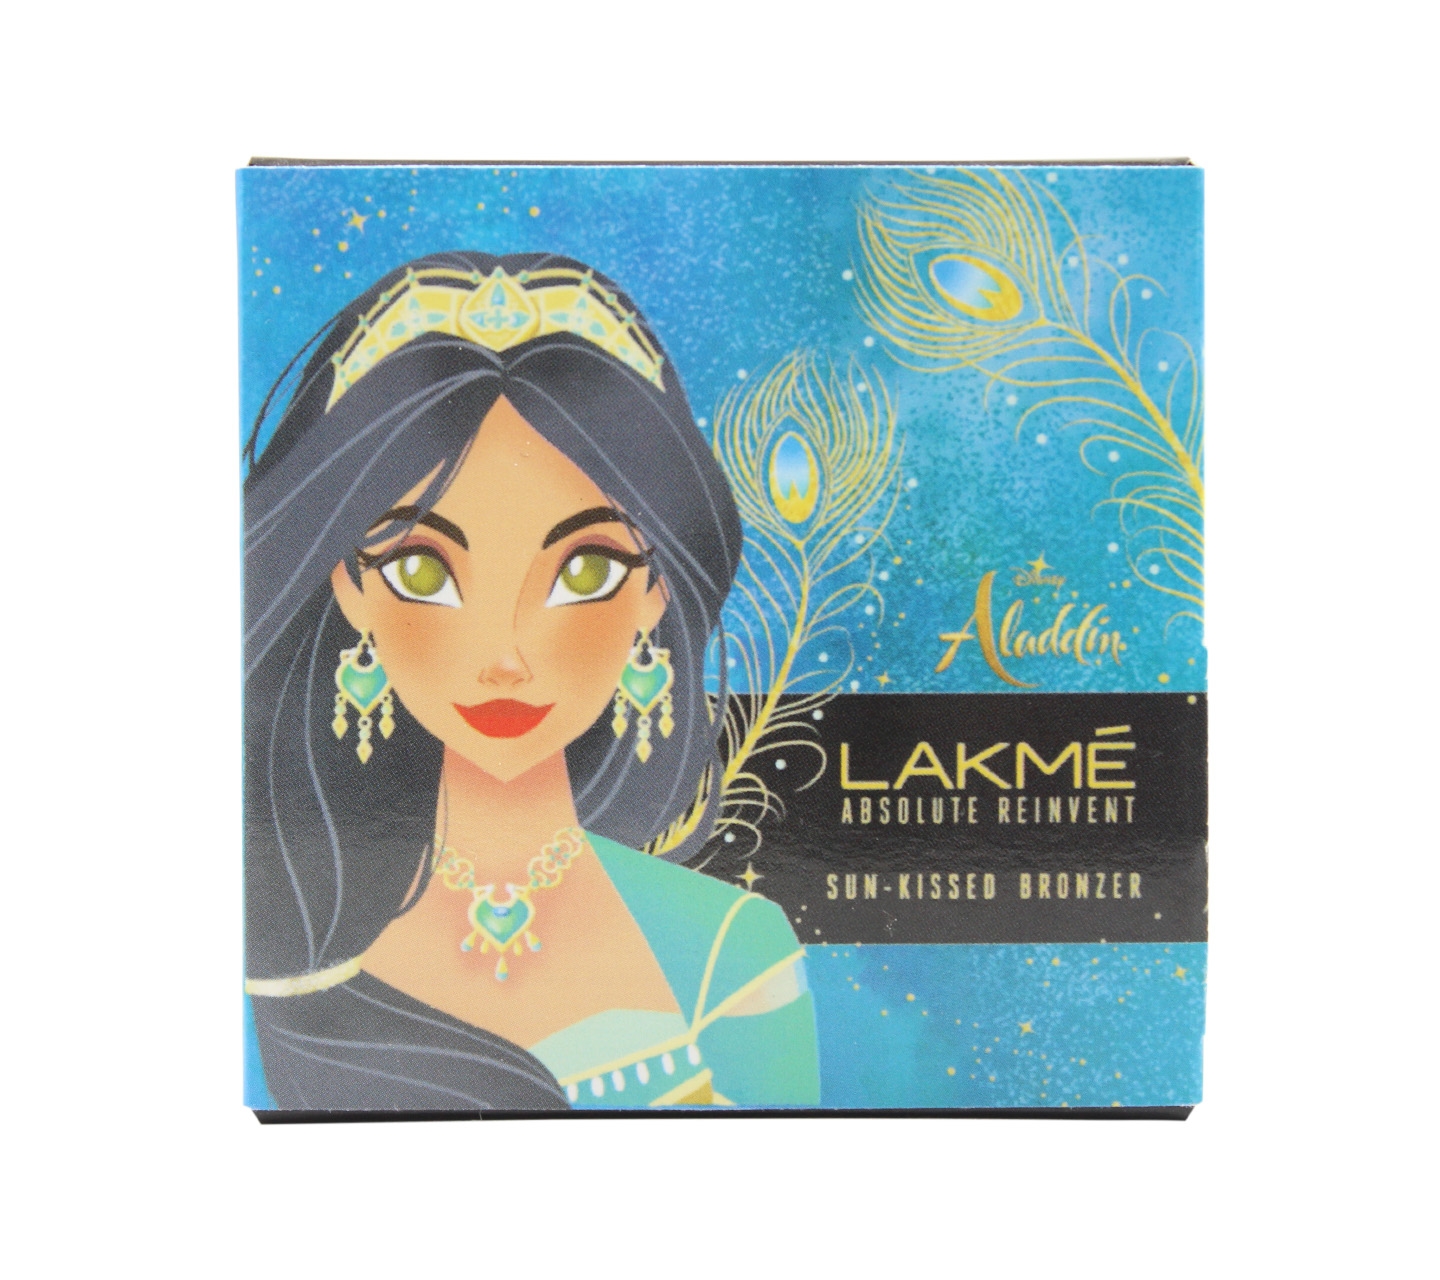 Lakme Absolute Sun-Kissed Bronzer Faces